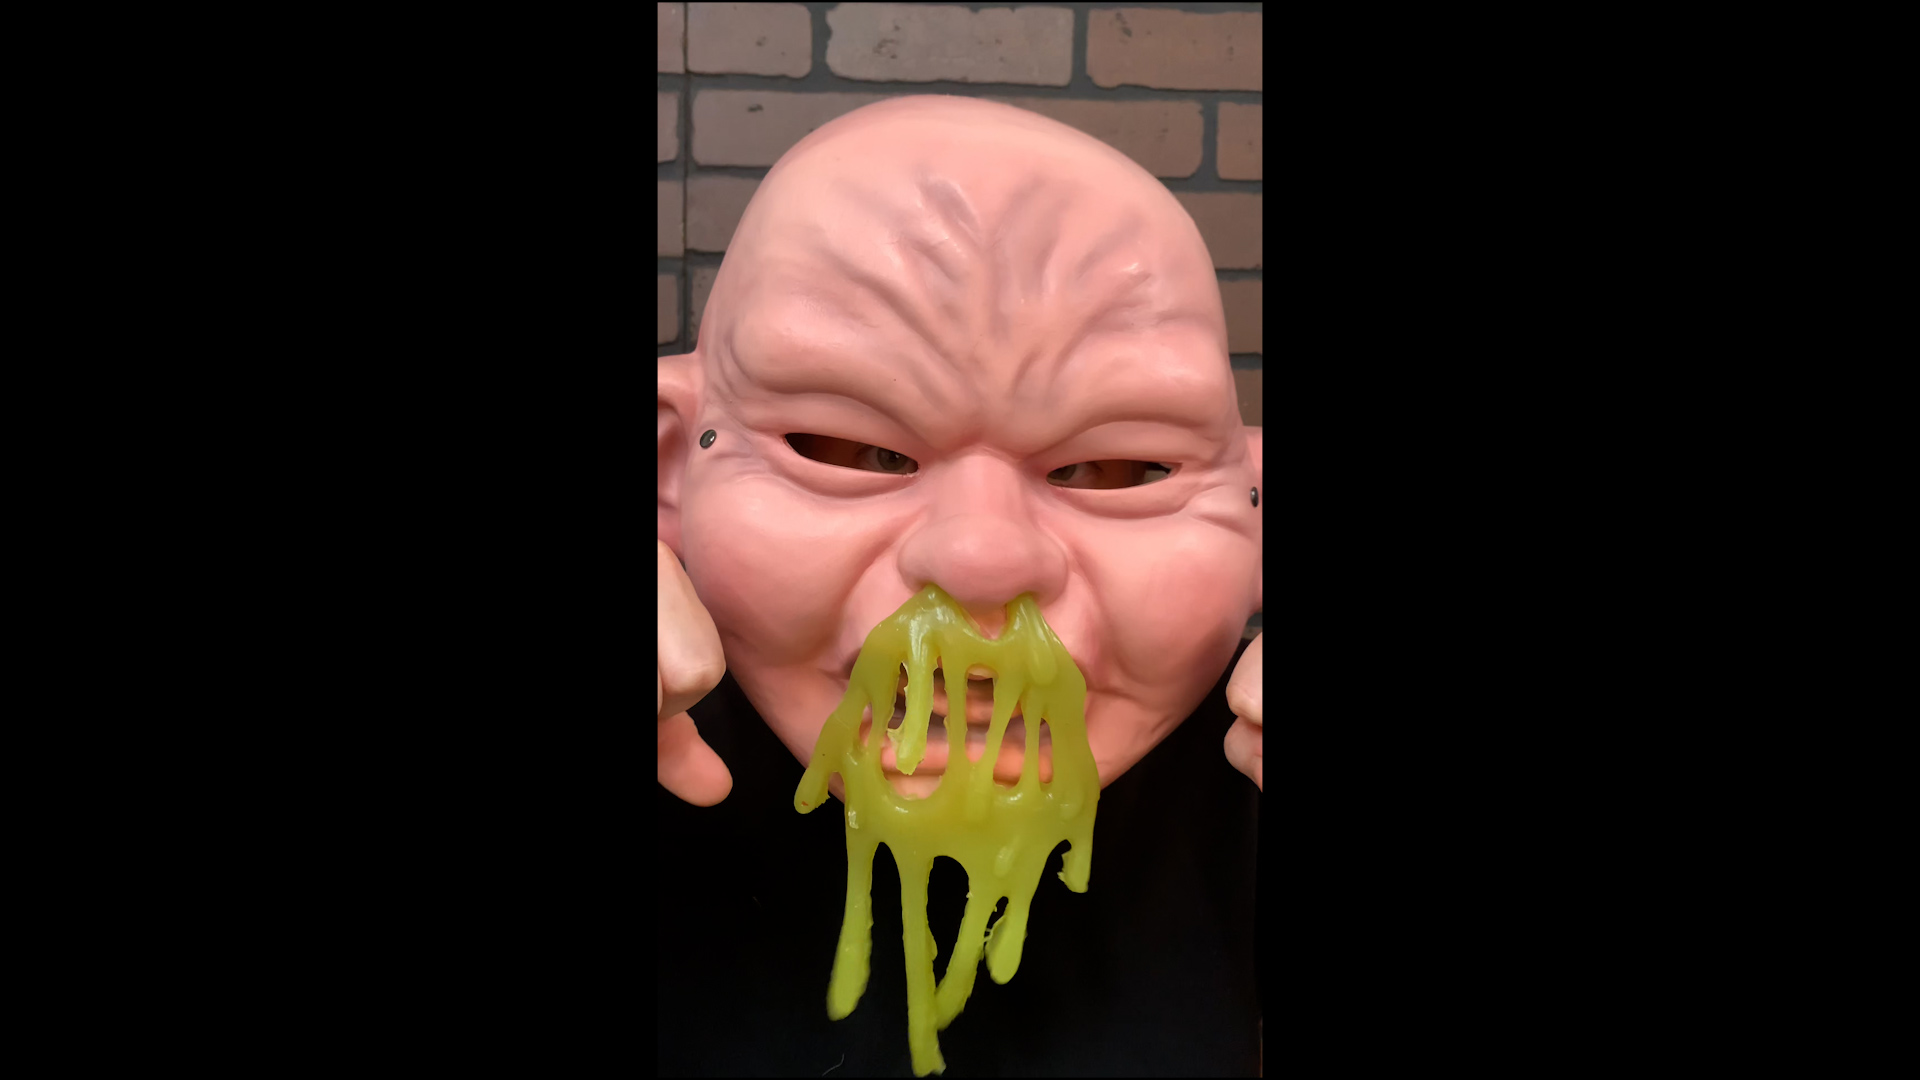 Want to be the most disgusting thing not currently on reality TV? This Adult Big Booger Baby Costume might get you close.